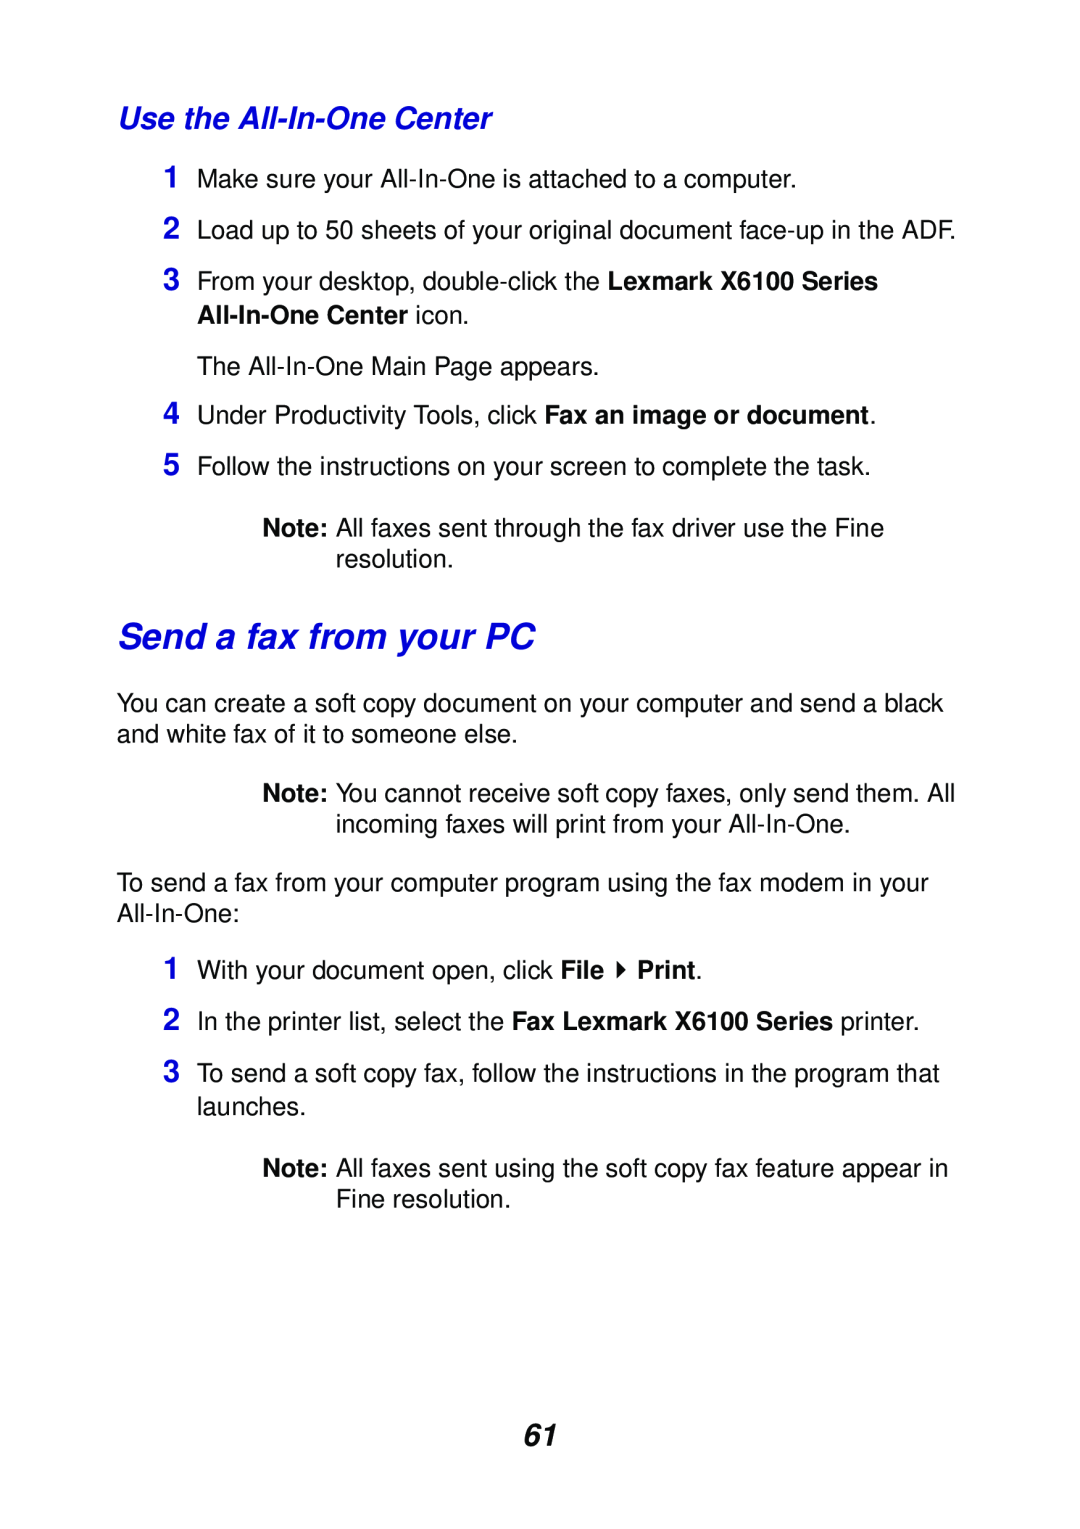 Lexmark X6100 manual Send a fax from your PC, Use the All-In-OneCenter 